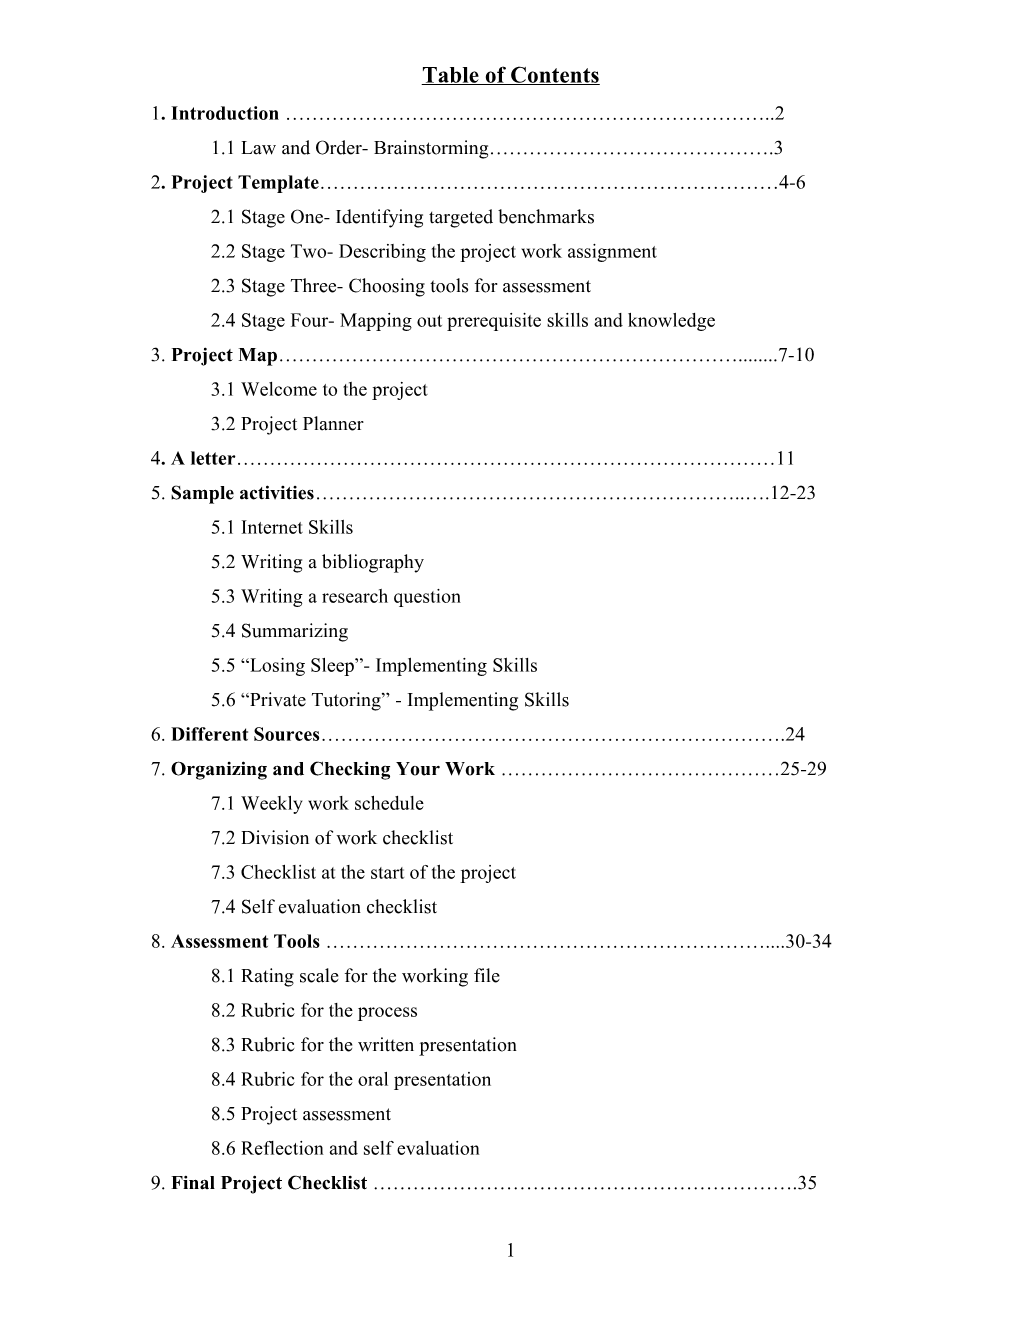 Table of Contents s528